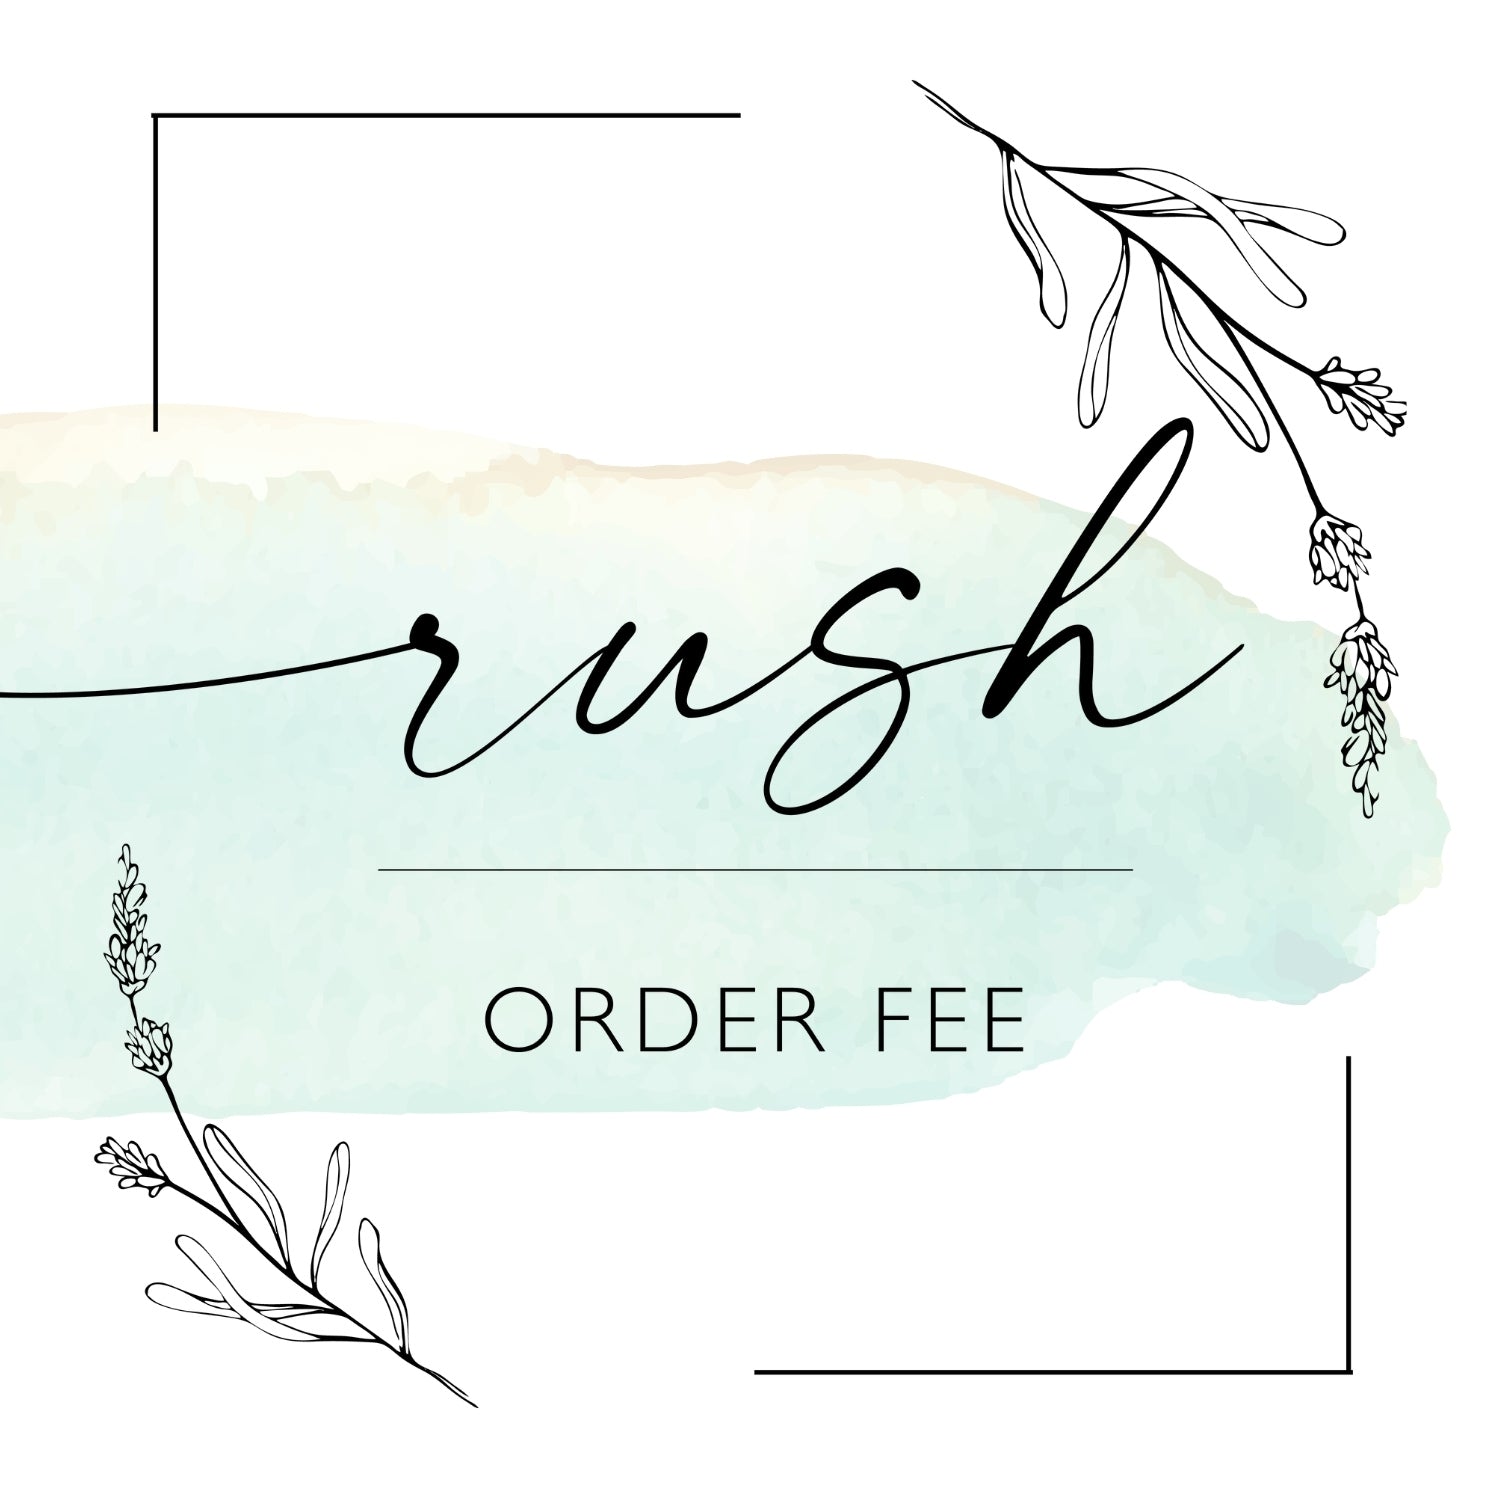 RUSH ORDER FEE - SCC Signs